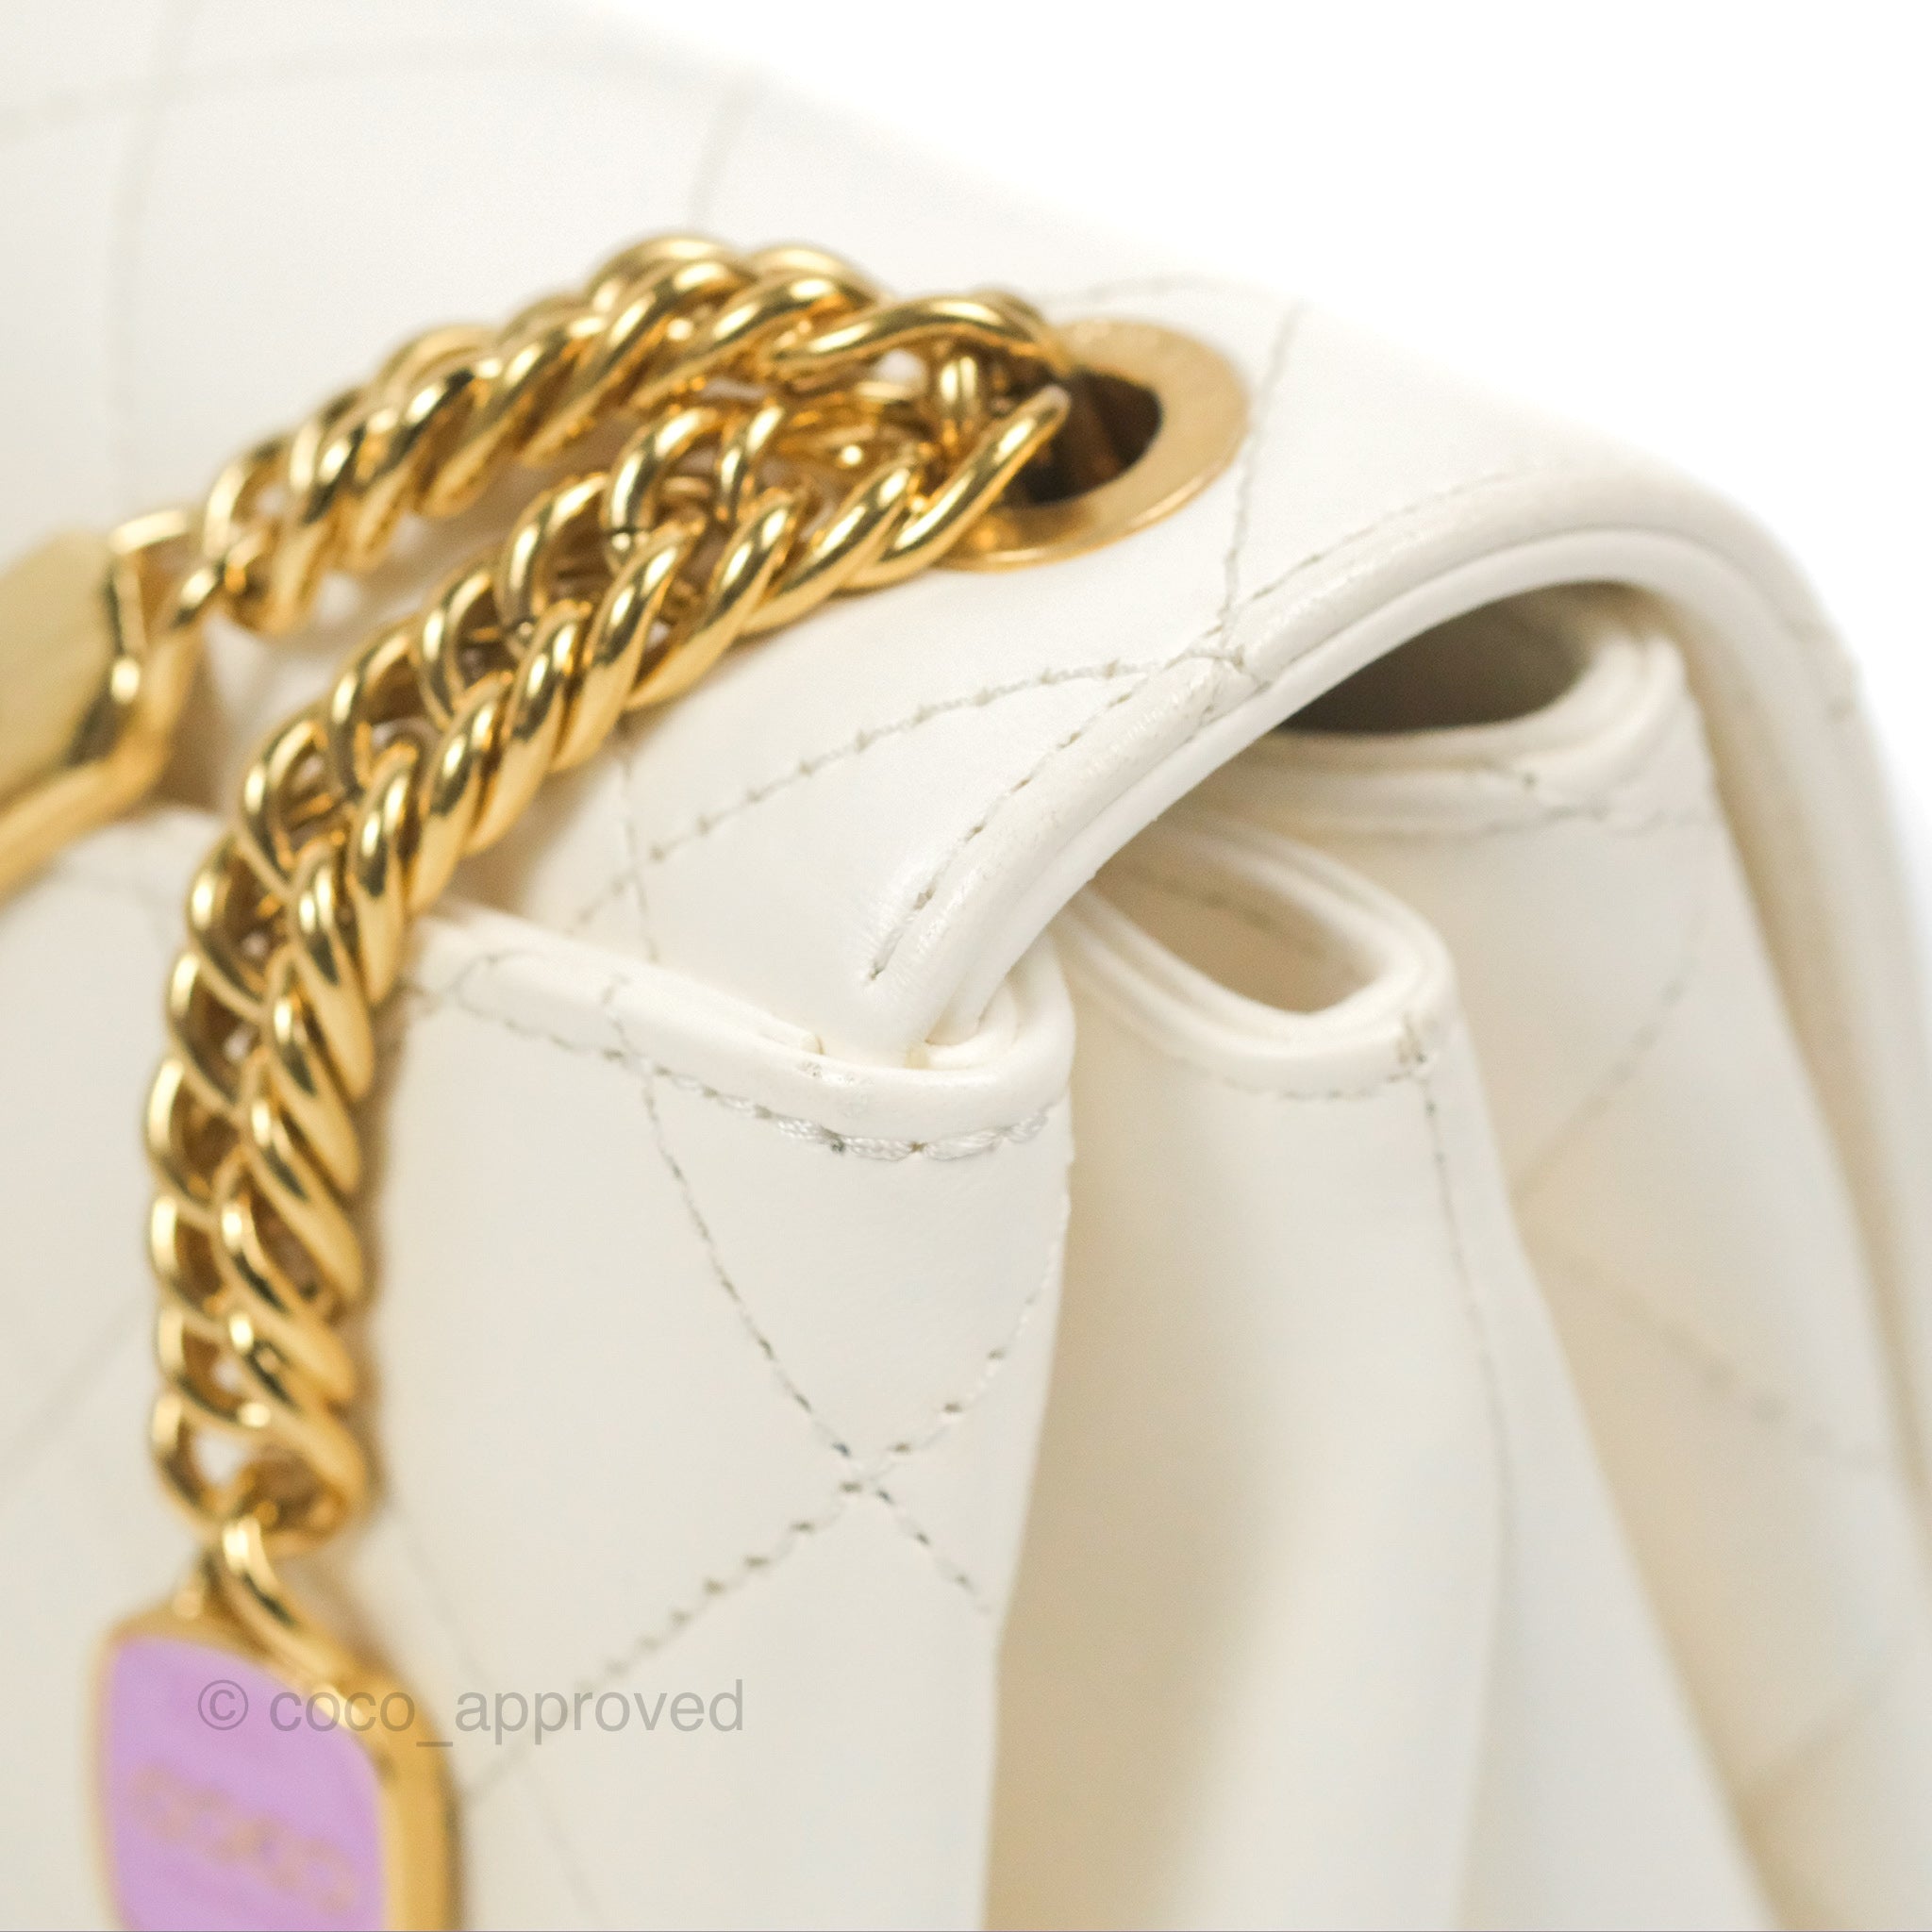 white chanel bag with gold chain